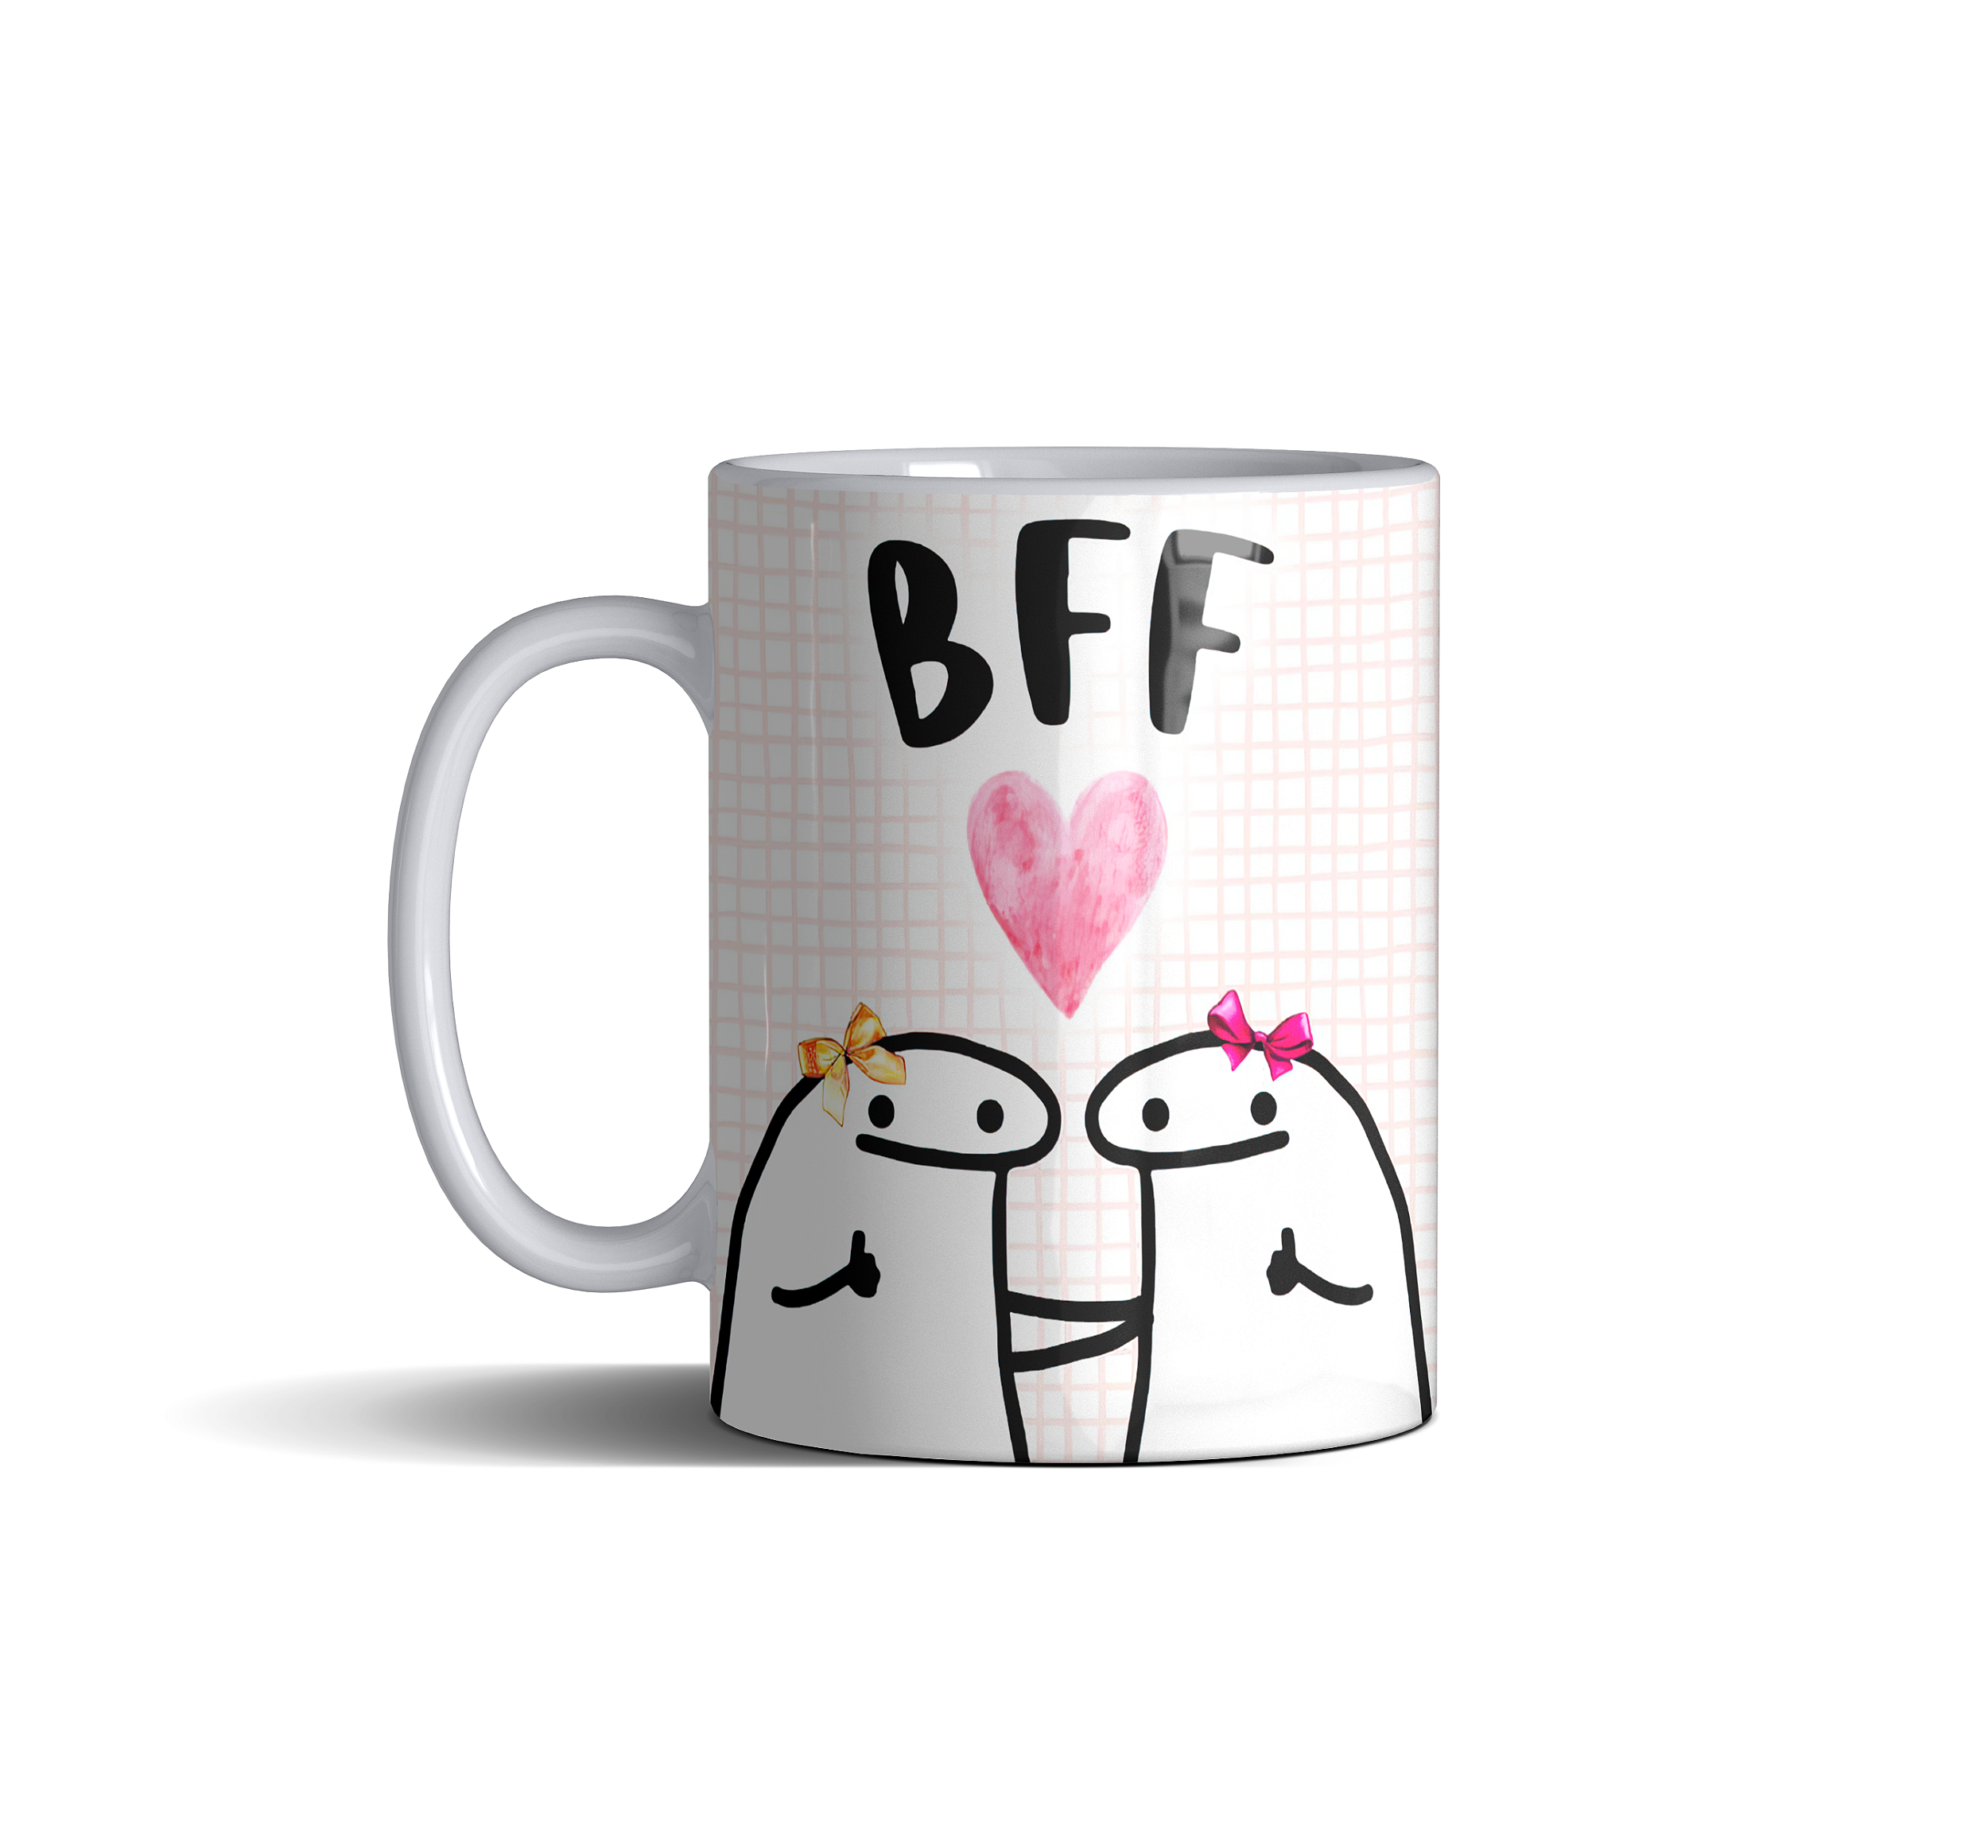 bff - Buscar con Google  Bff, Bff pictures, Friend bff